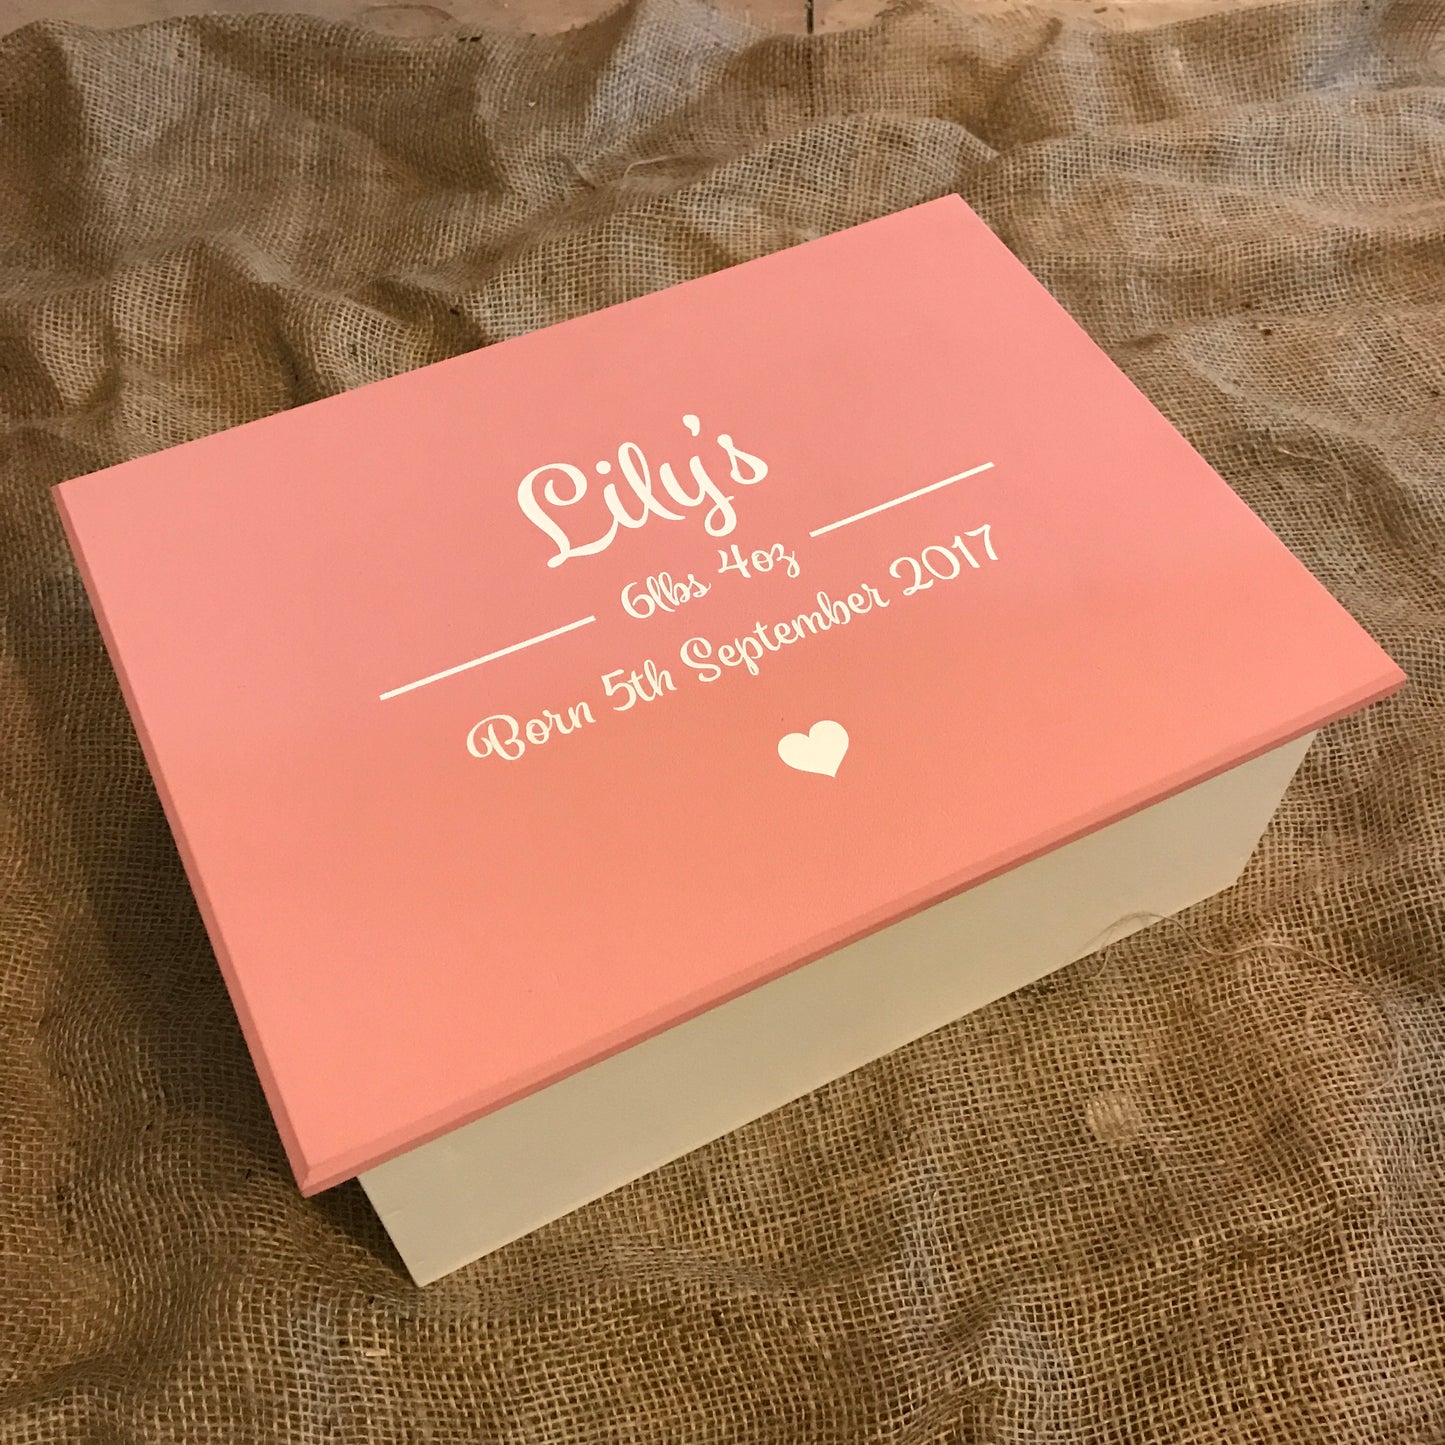 Personalised Memory Keepsake Boxes from The Wrong End of Town